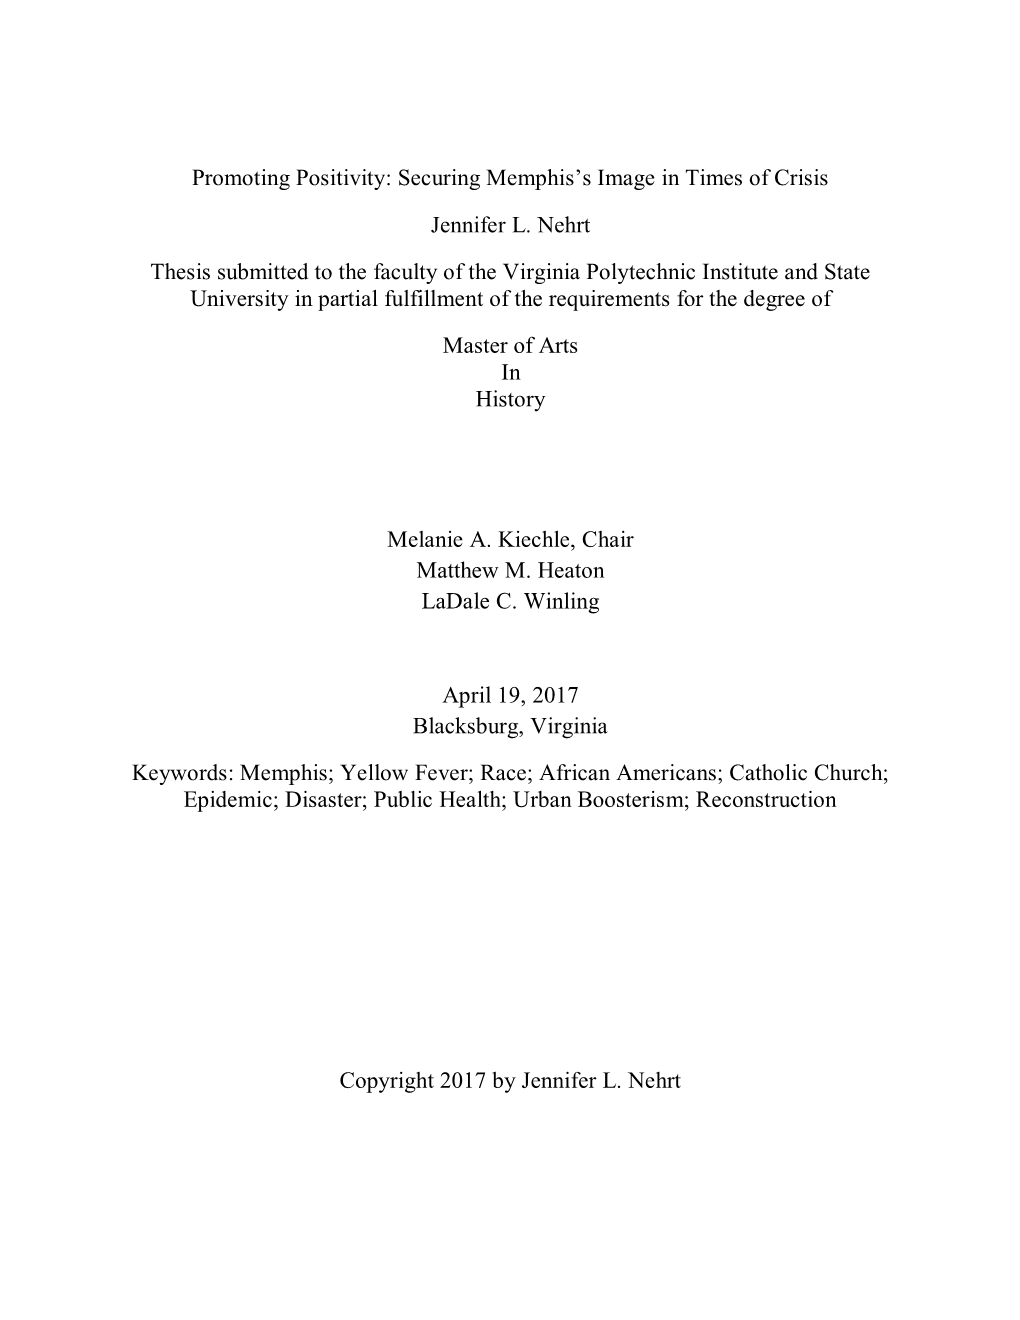 Securing Memphis's Image in Times of Crisis Jennifer L. Nehrt Thesis Submitted to the Faculty of The